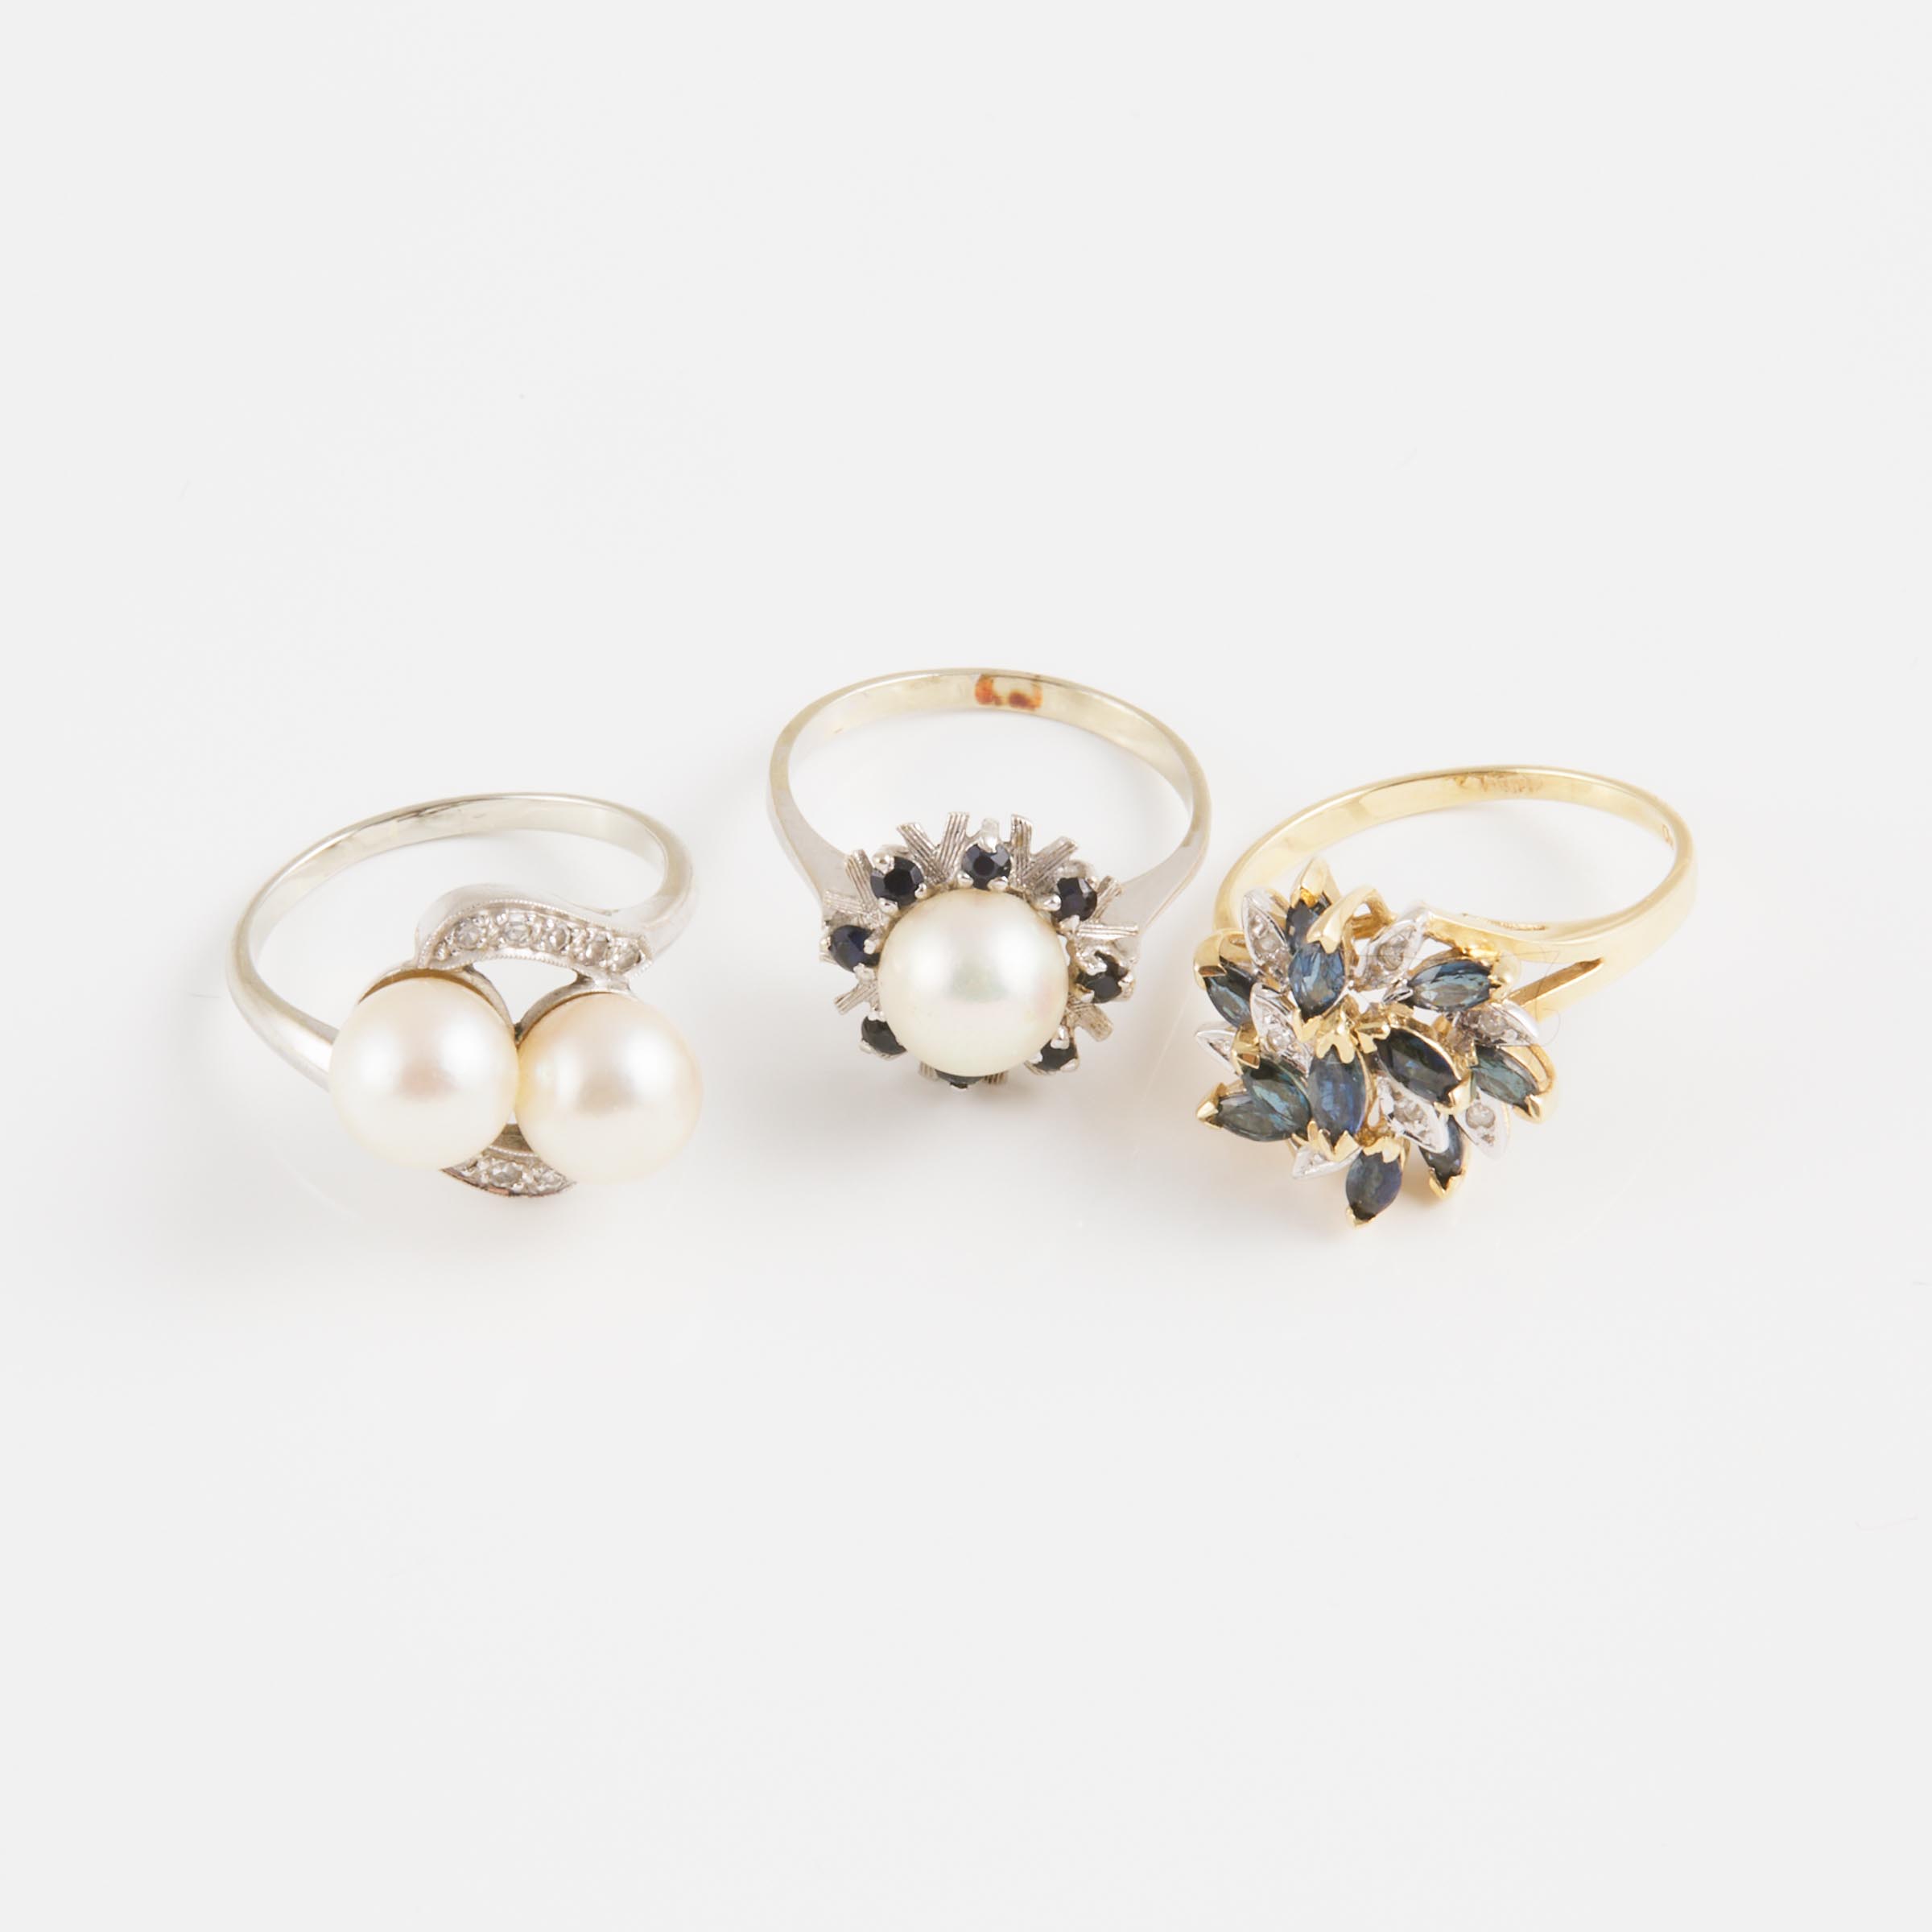 1 x 18k And 2 x 10k Yellow & White Gold Rings